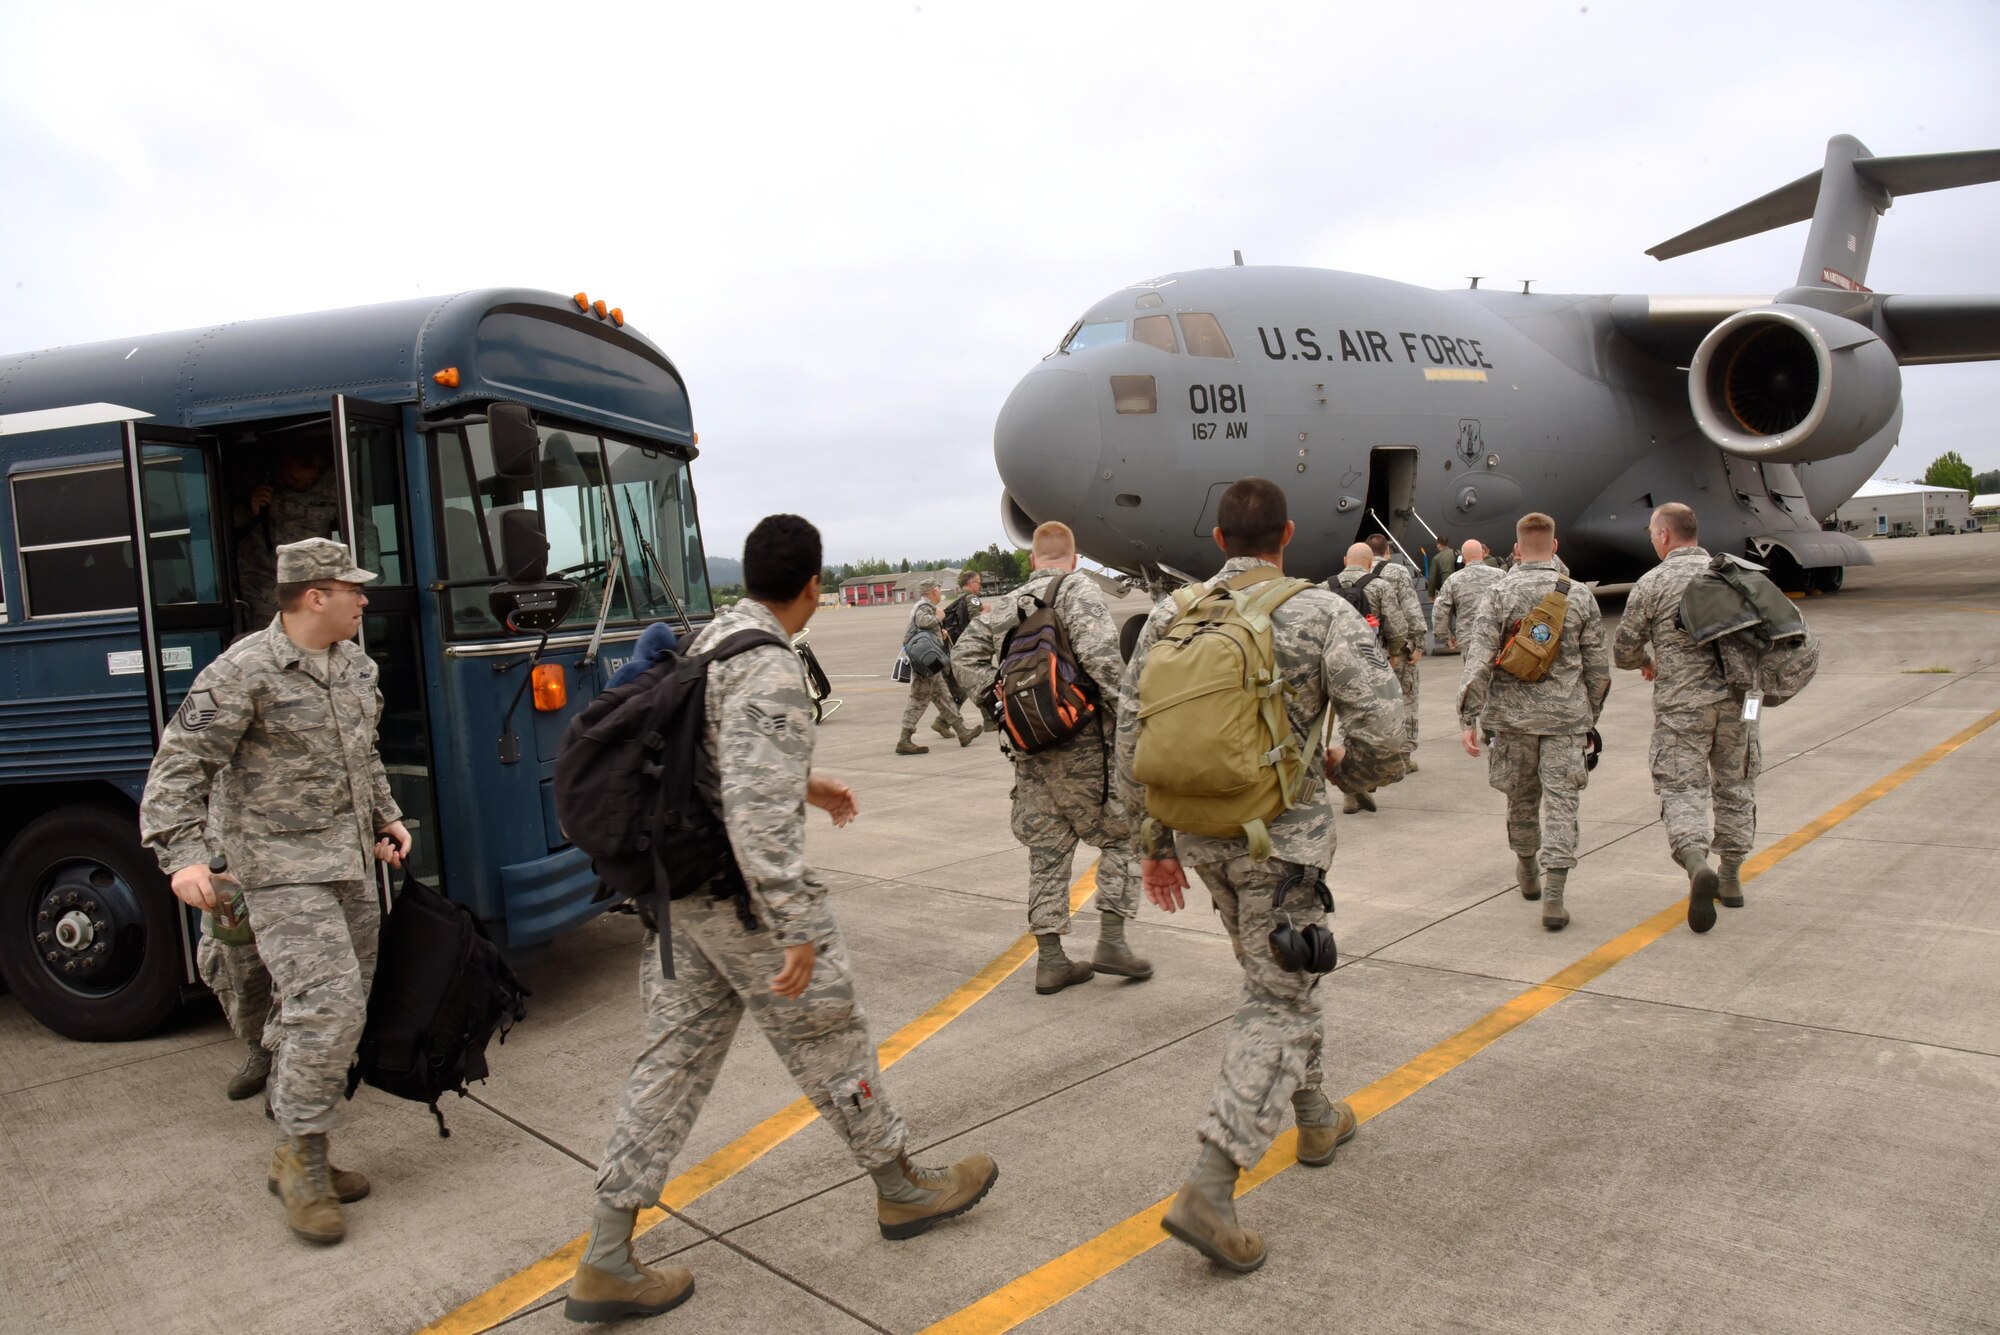 Airmen from the 142nd Fighter Wing depart busses and begin to load a waiting C-17 Globemaster III at the Portland Air National Guard Base, Ore., that will transport them to Nellis Air Force Base, Nev., and support the Weapons Instructor Course, May 29, 2017 (U.S. Air National Guard photo by Master Sgt. John Hughel, 142nd Fighter Wing Public Affairs). 